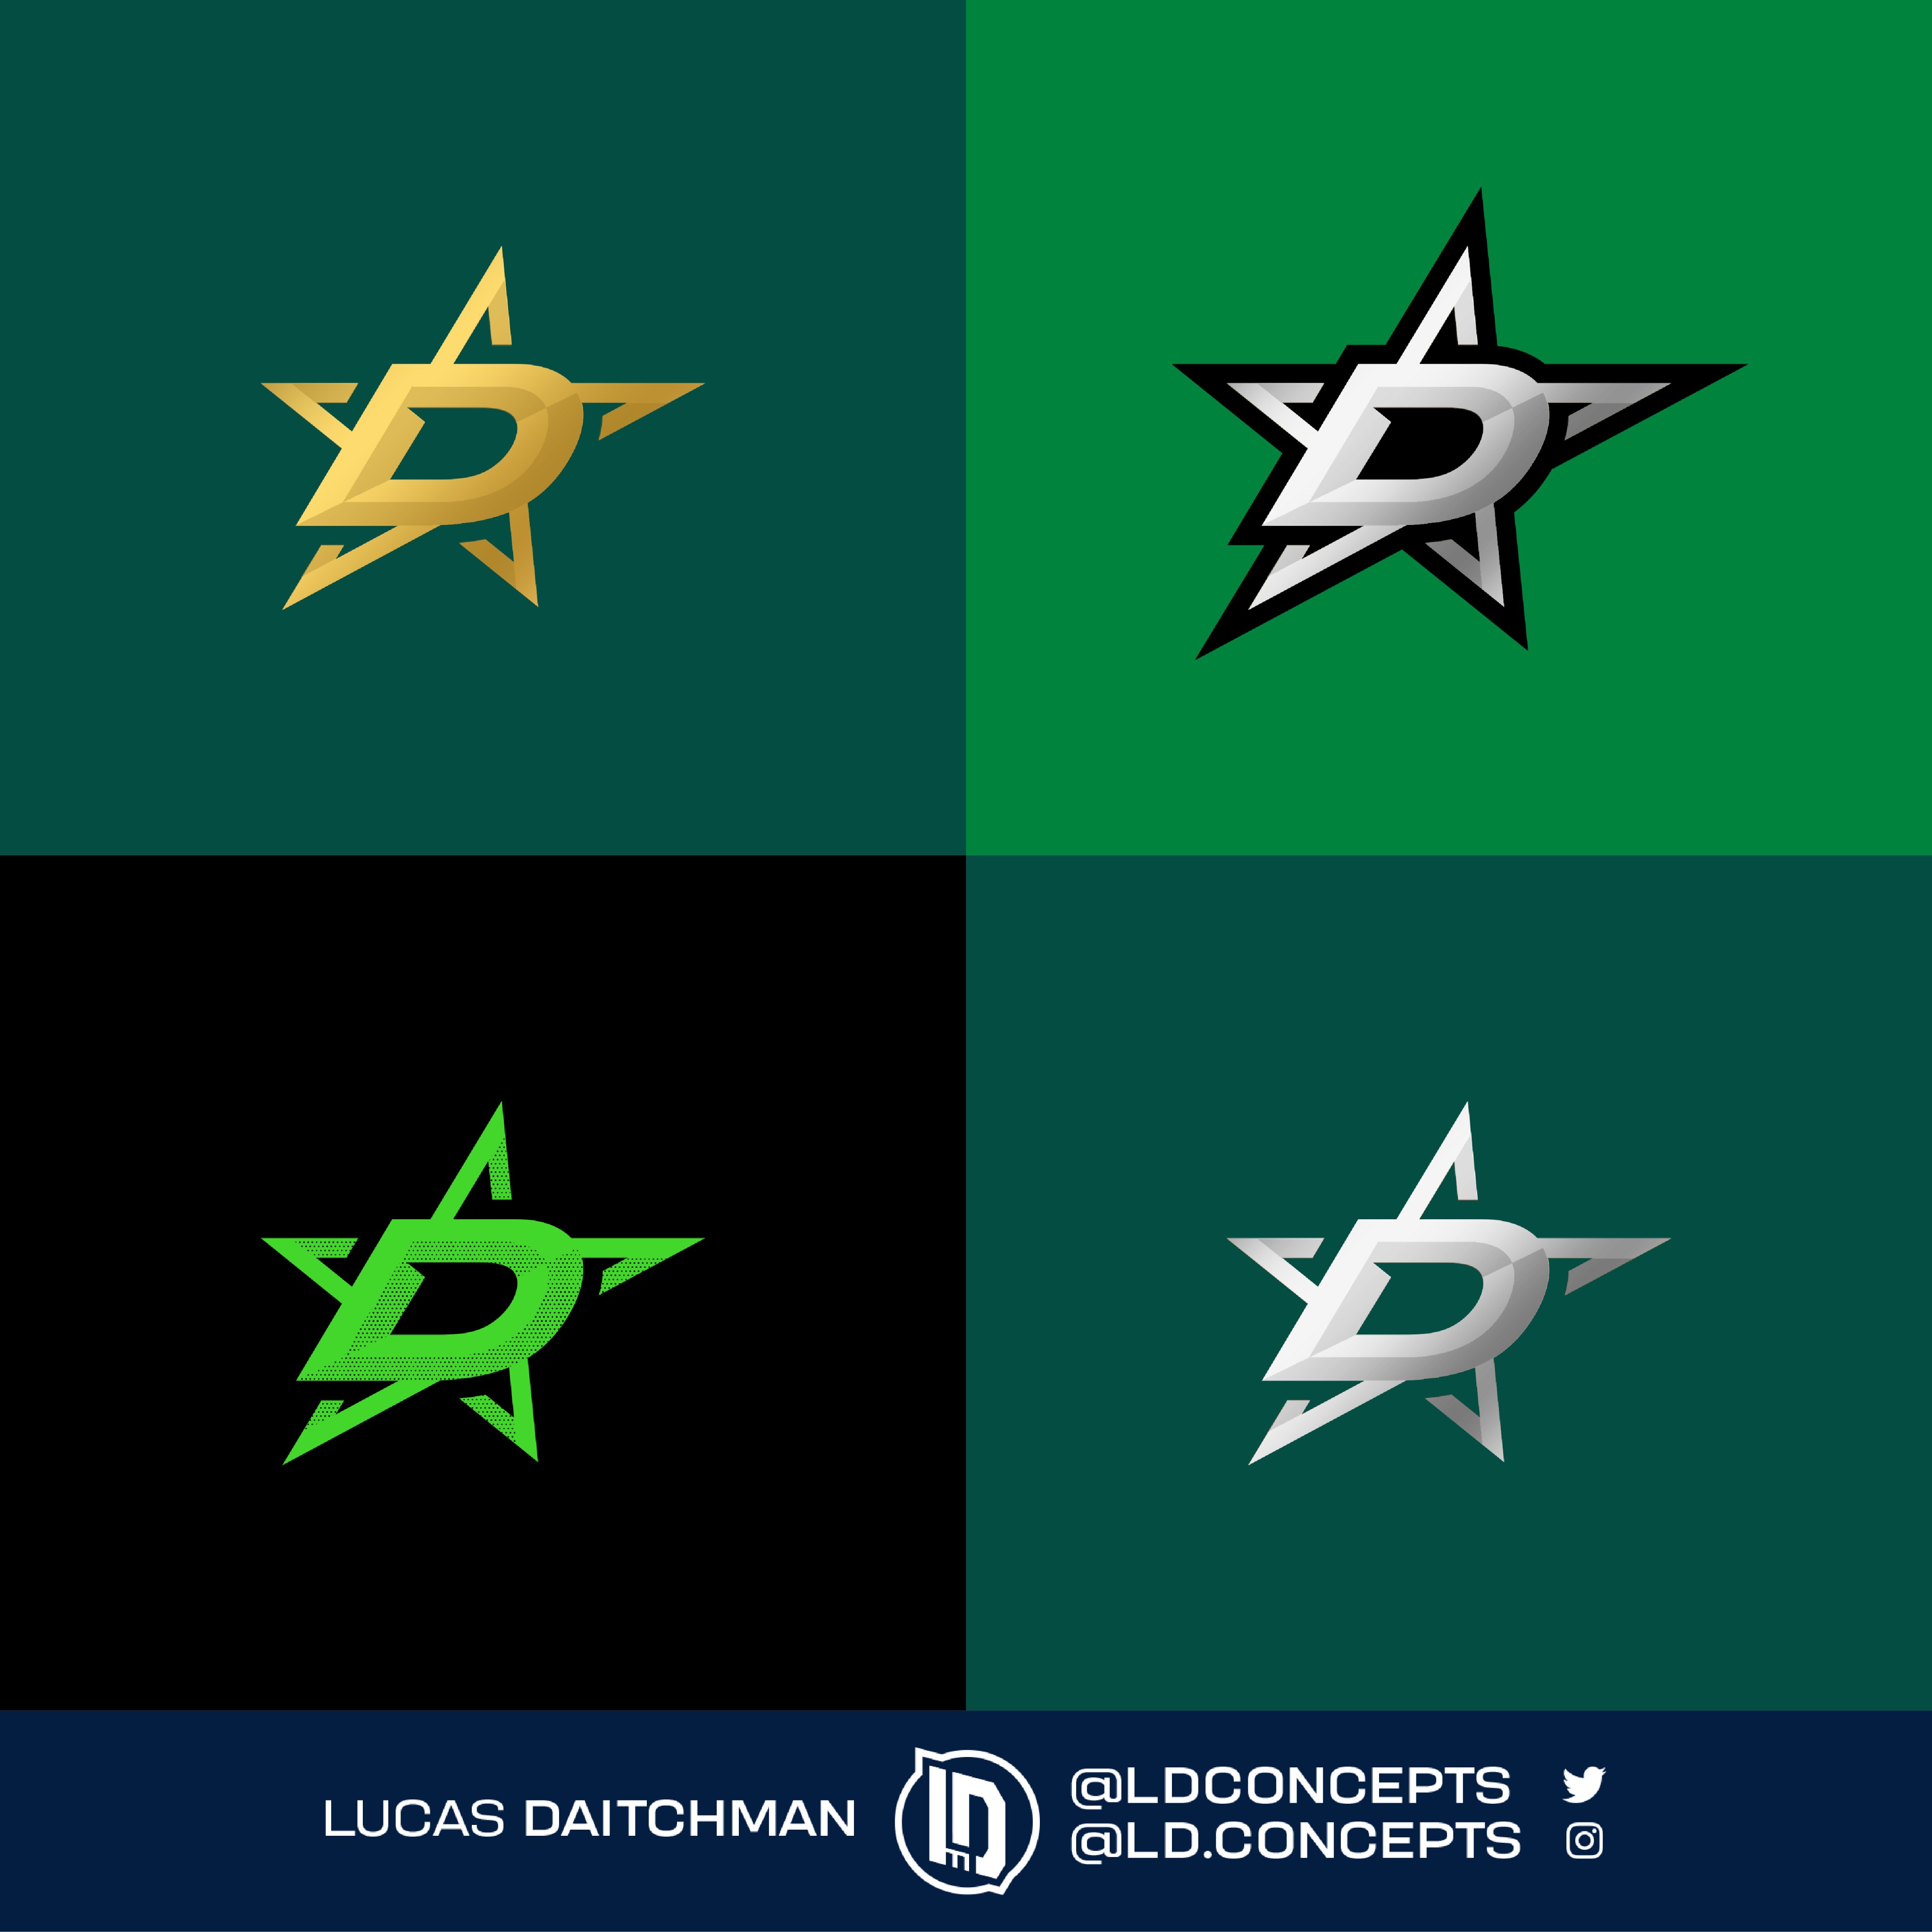 Lucas Daitchman on X: Here's a pair of jersey ideas for the 2023 # NHLAllStar tournament in South Florida. The wacky stripes play off the  event logo unveiled last month and keep things